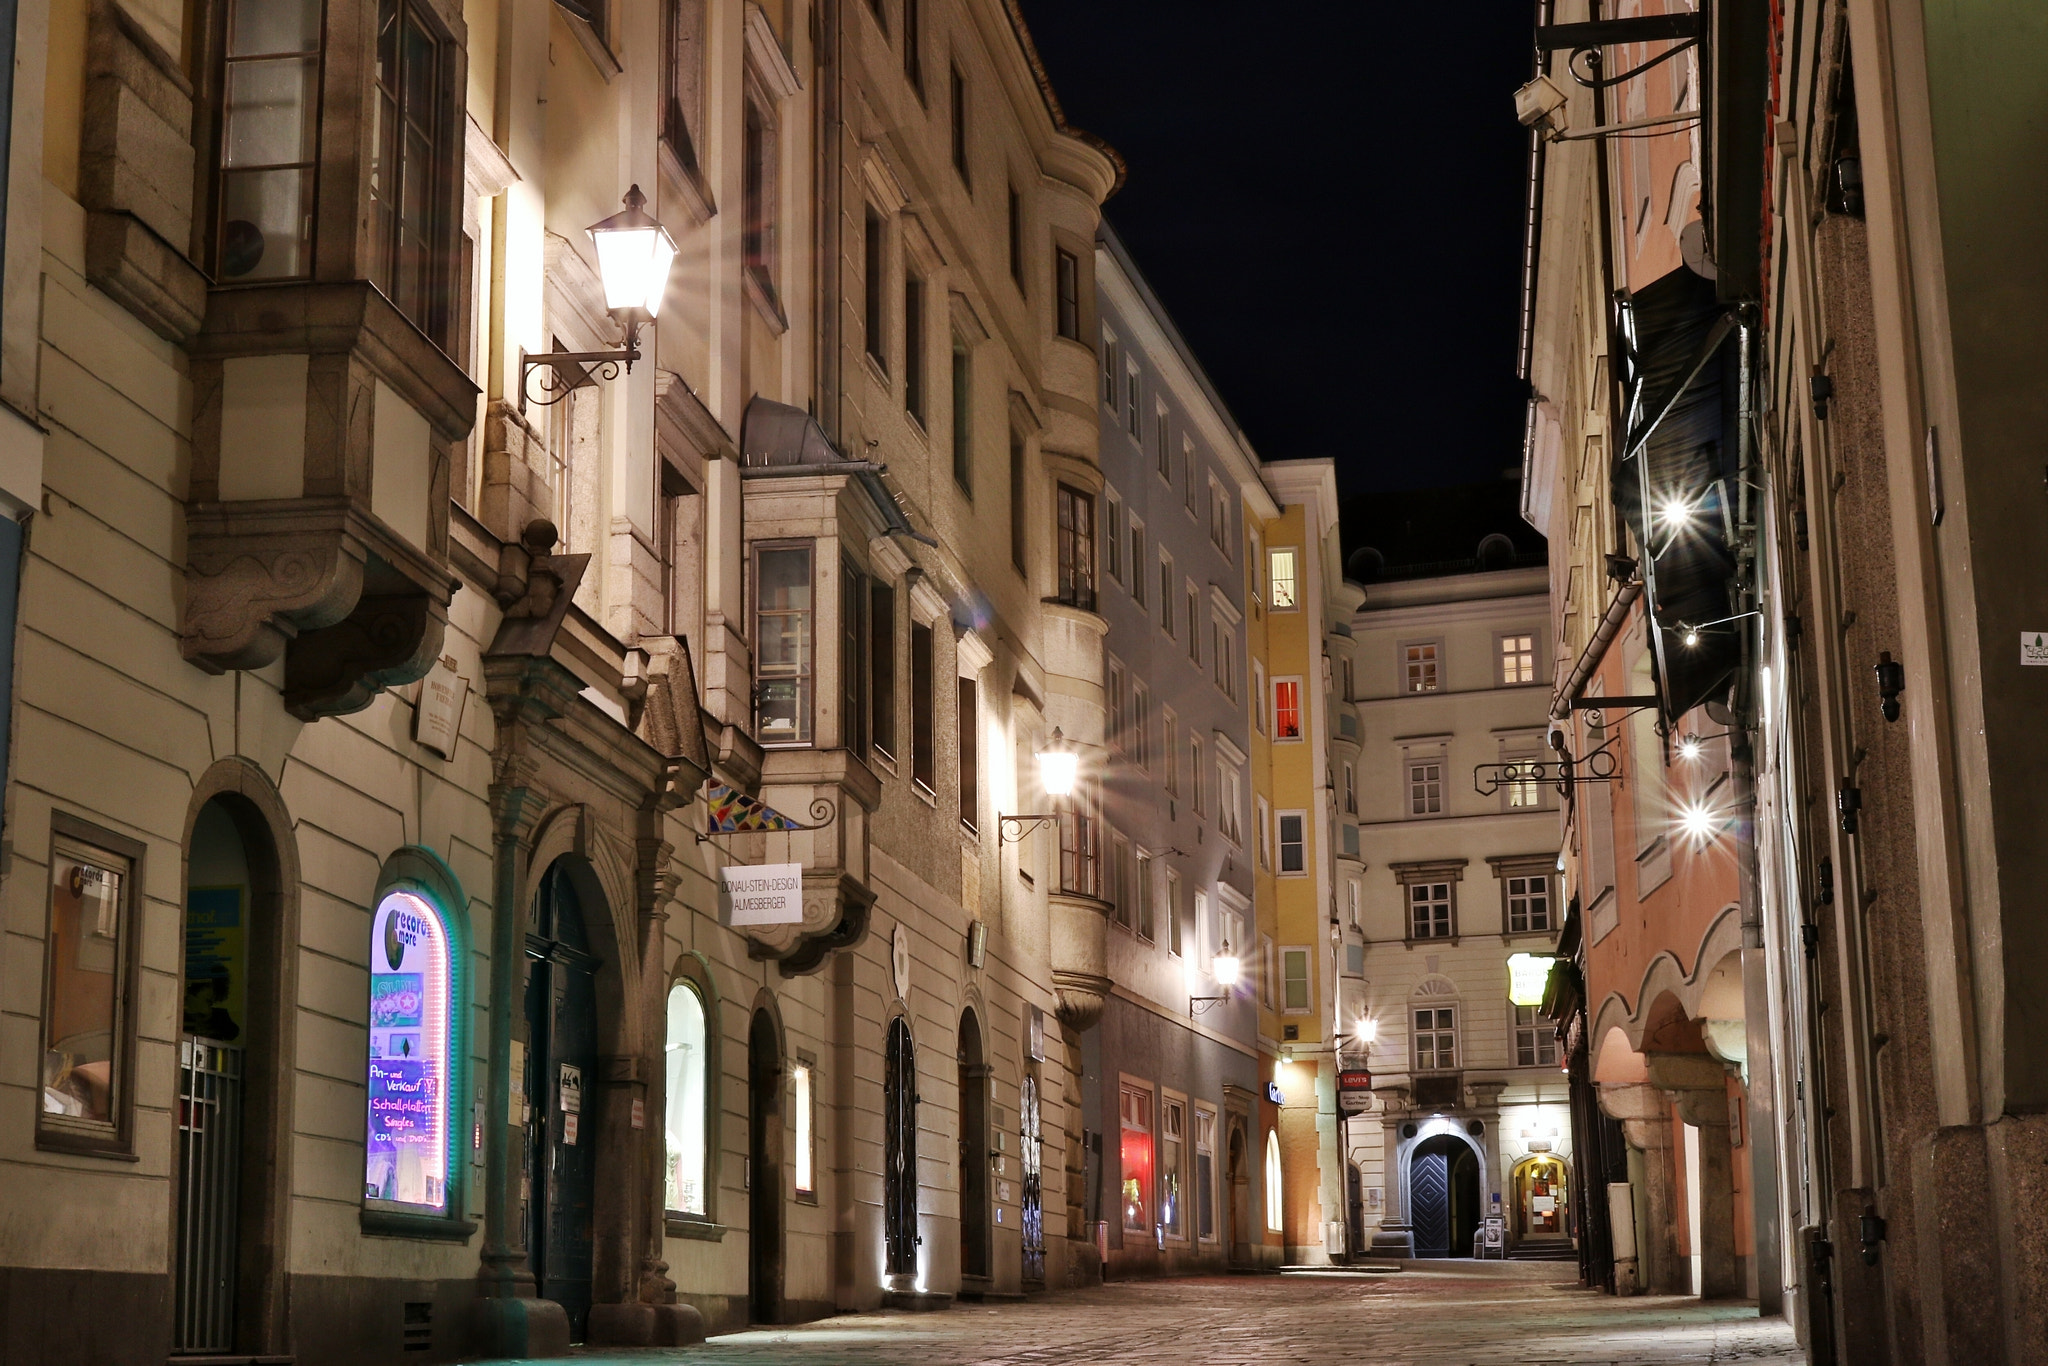 IS STM sample photo. Old town of linz/austria photography